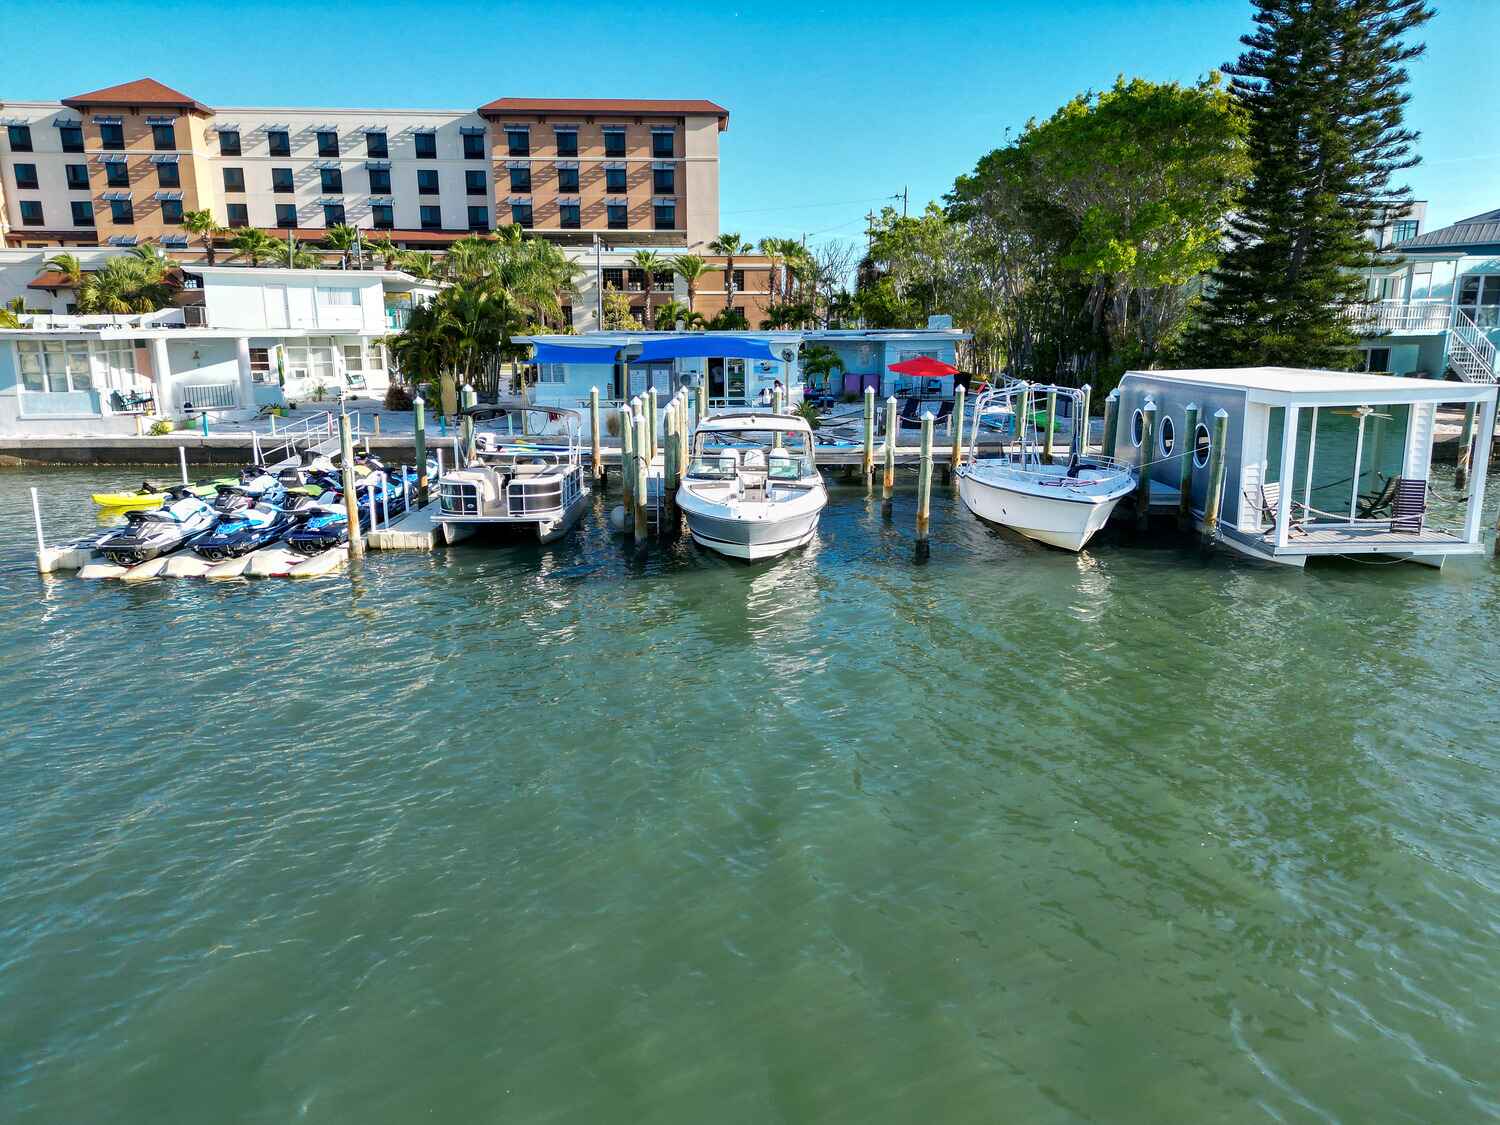 Our marina and socking station for our boats and jet skis. Plus our house boat rental on the water